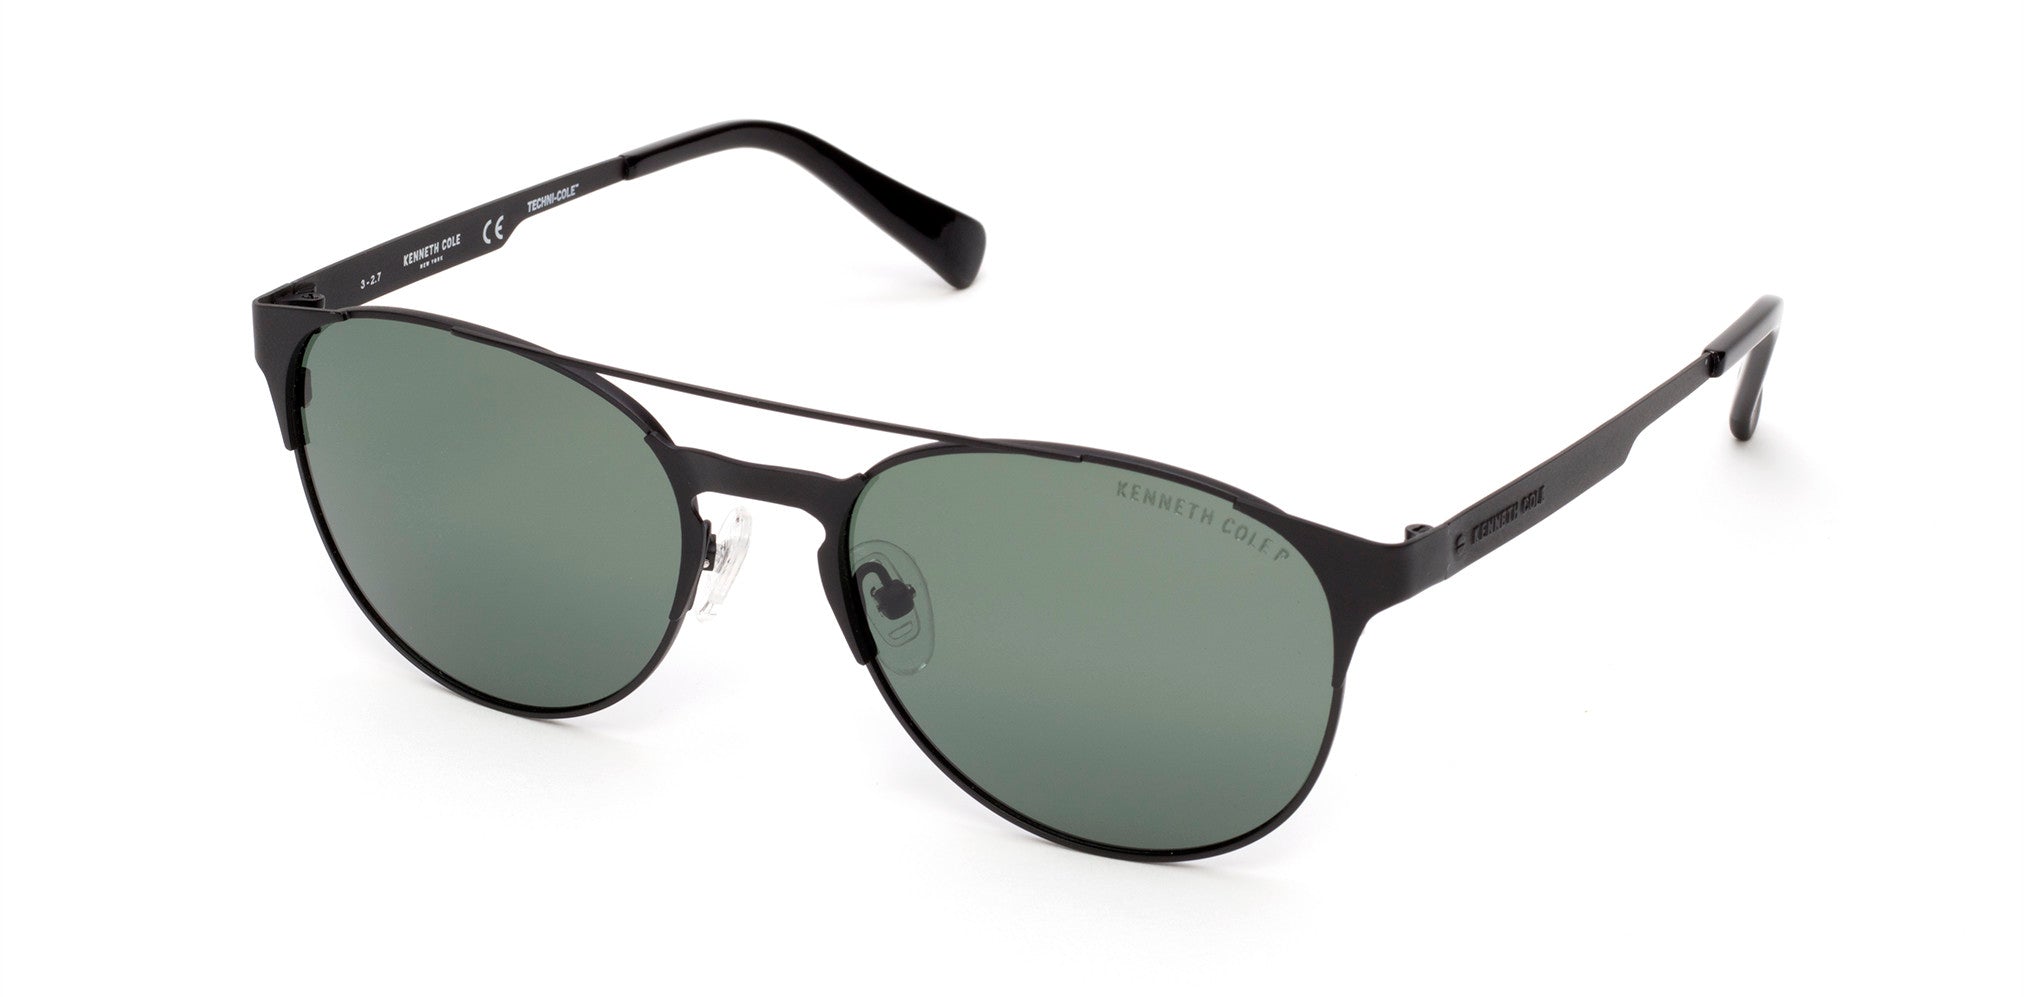 Kenneth Cole New York,Kenneth Cole Reaction KC7224 Round Sunglasses 02R-02R - Matte Black / Green Polarized Lenses